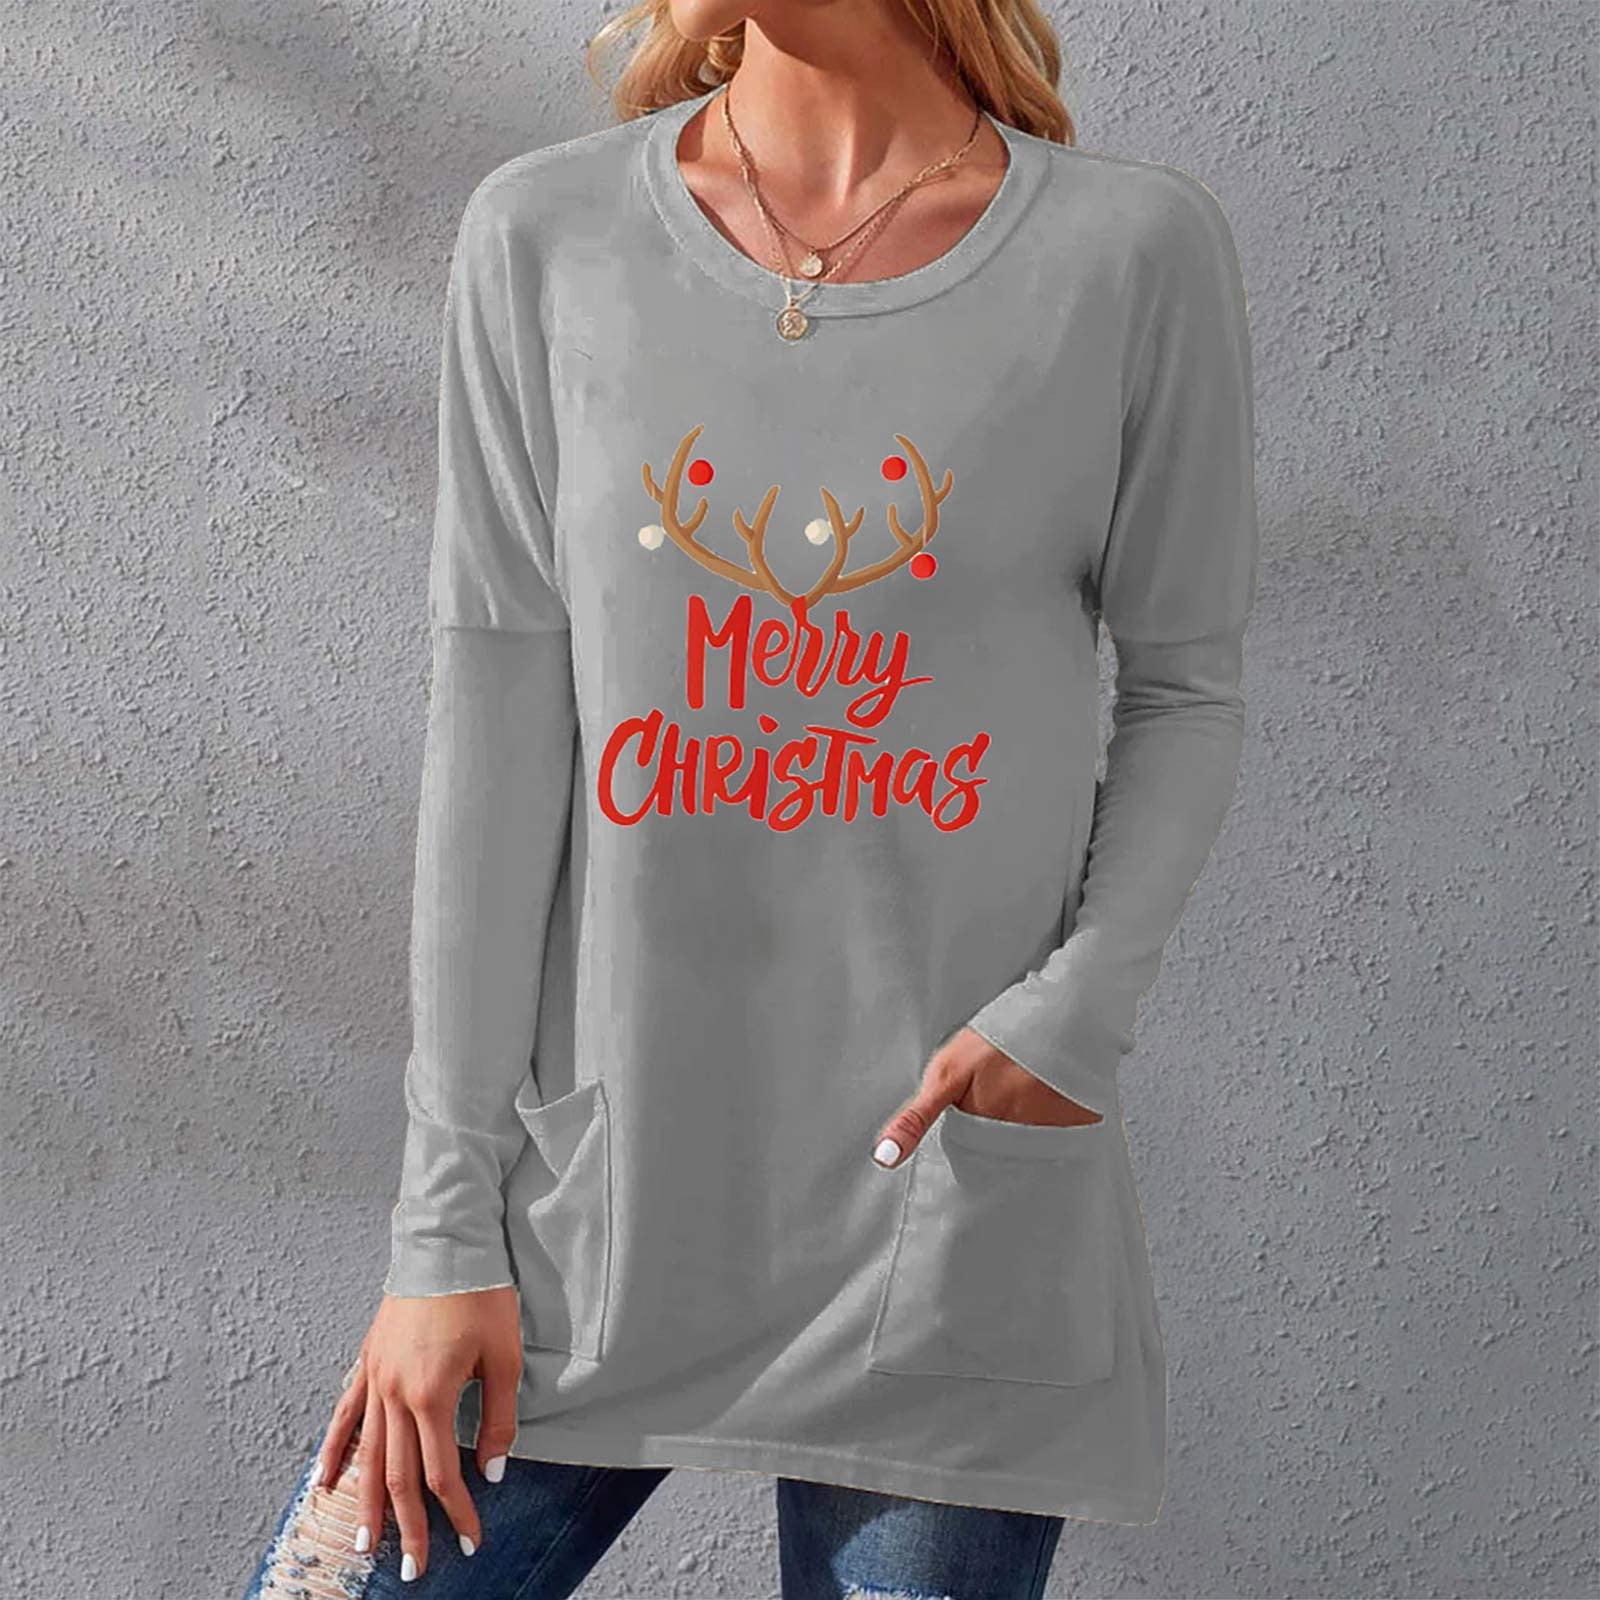  Tuianres Christmas Shirts for Women Plus Size Dressy Fashion  Round Neck Printed Long Sleeve Casual Loose Top Shirt : Sports & Outdoors